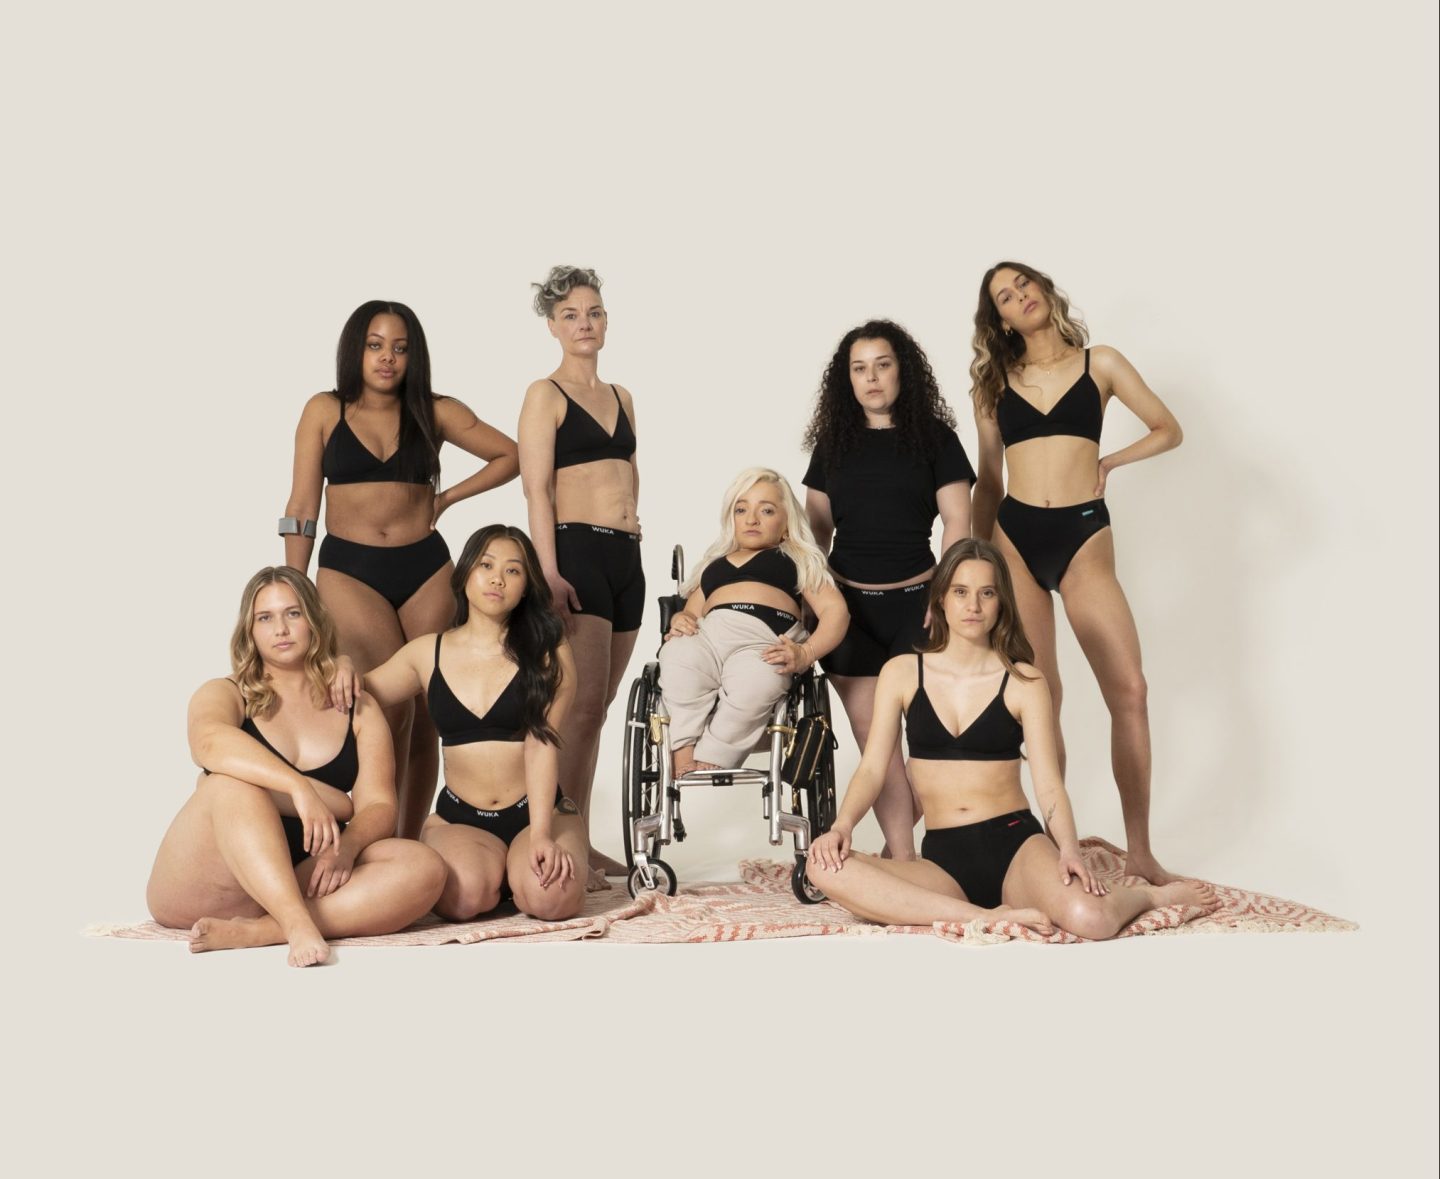 Group shot of diverse women modelling WUKA underwear. The group includes people from different ethnic backgrounds, body sizes, and visibly disabled women.